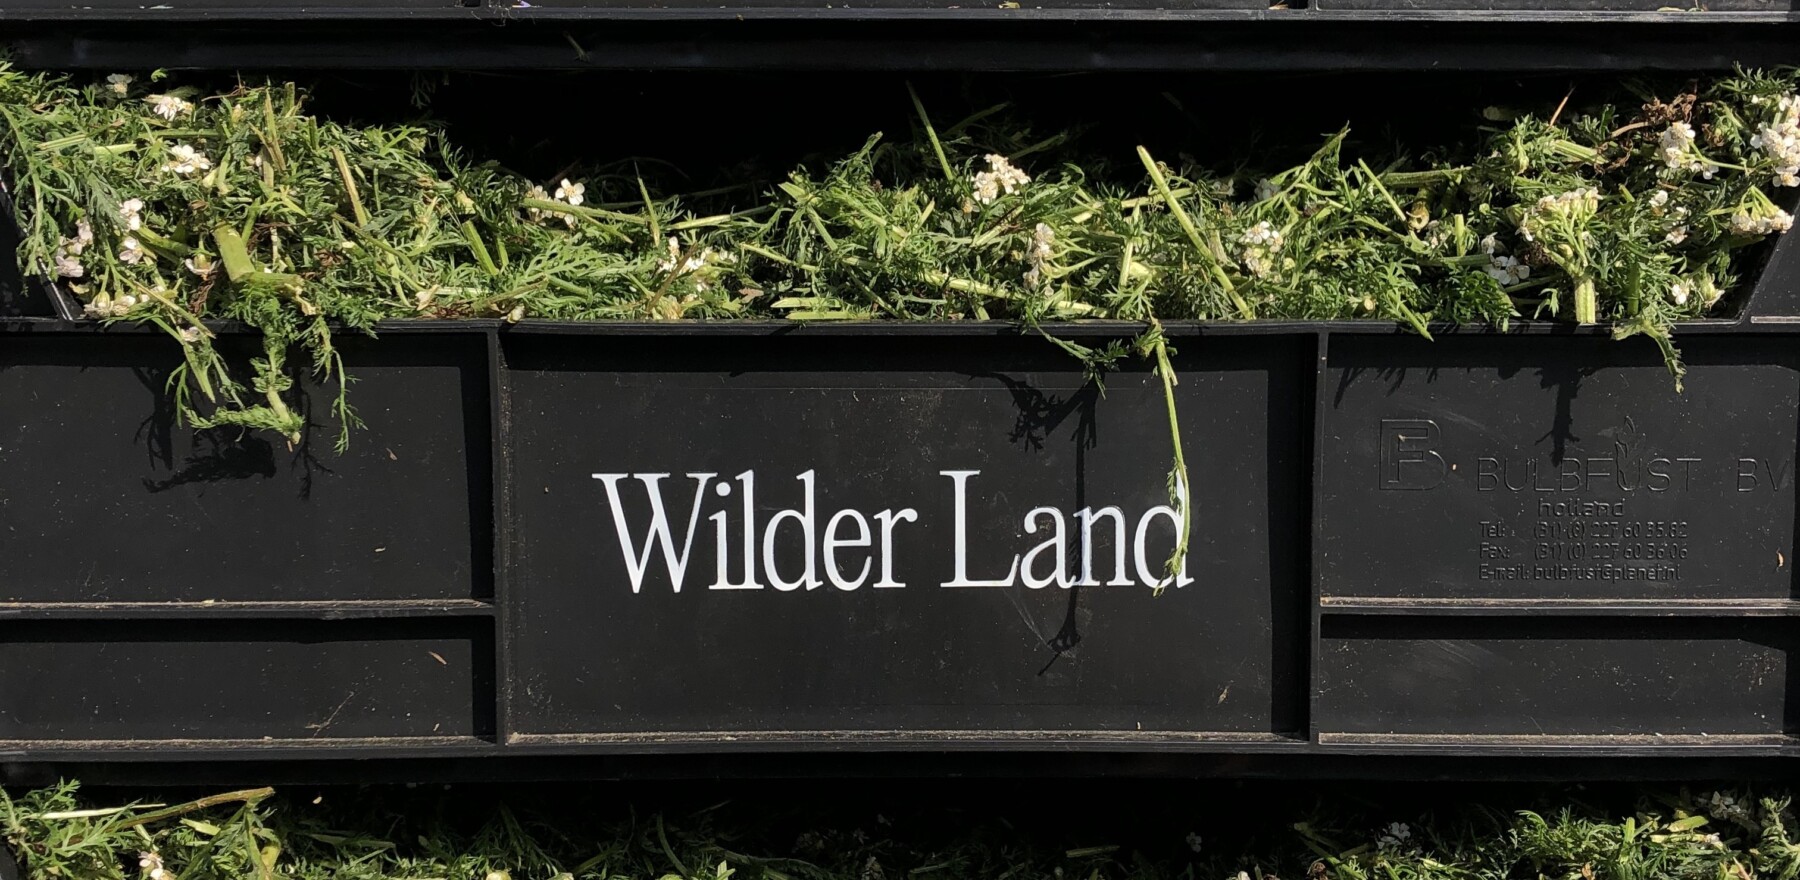 New collaboration: tea from Wilder Land